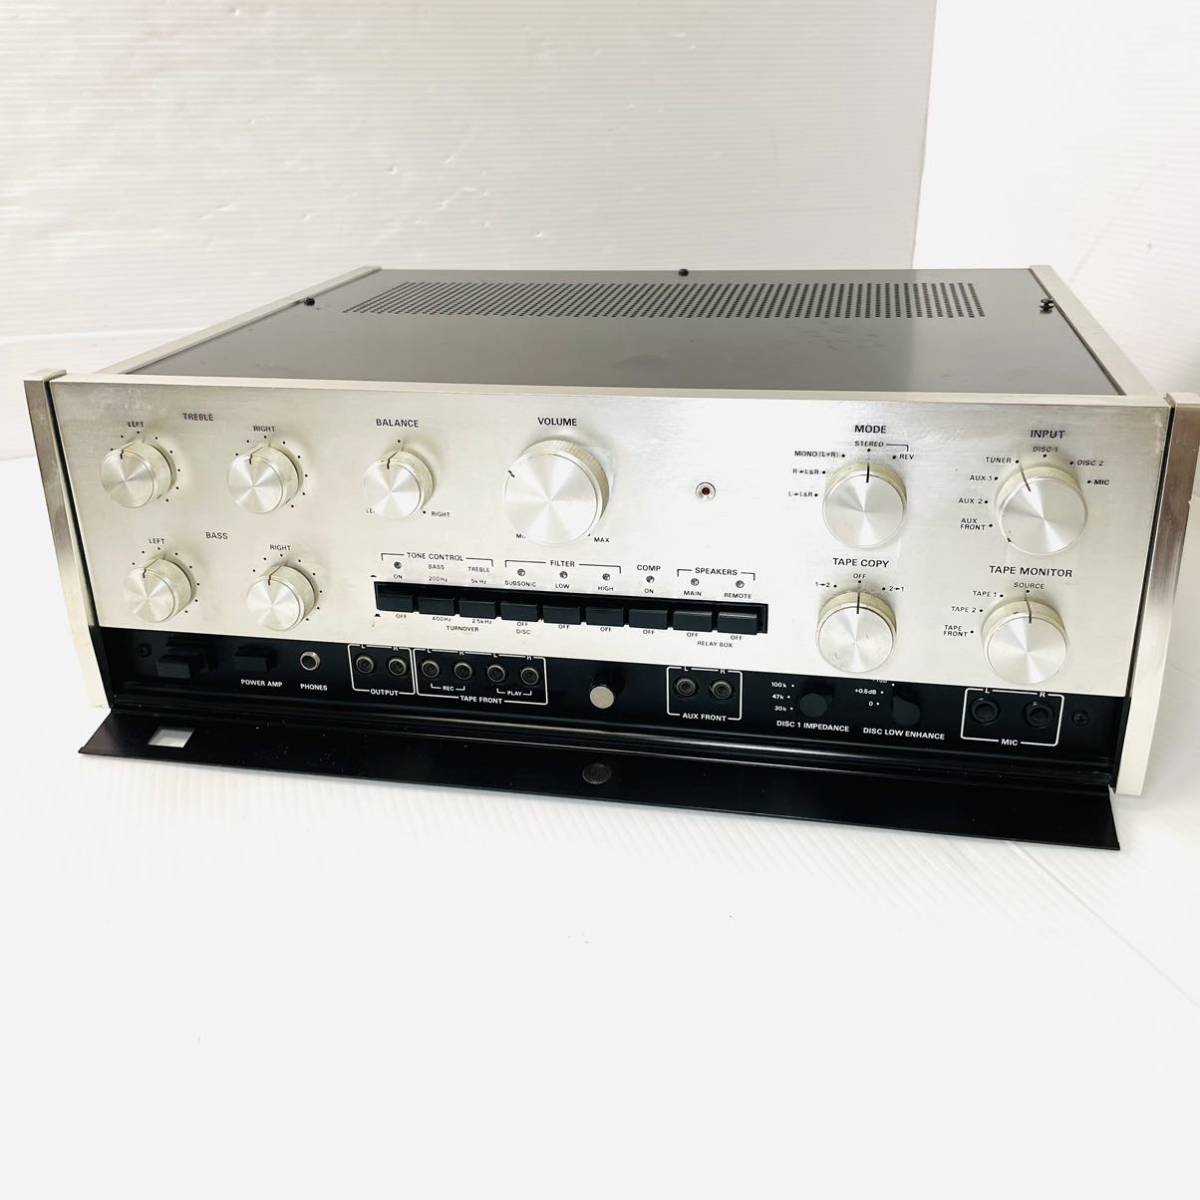 Accuphase アキュフェーズ コントロールアンプ C-200-